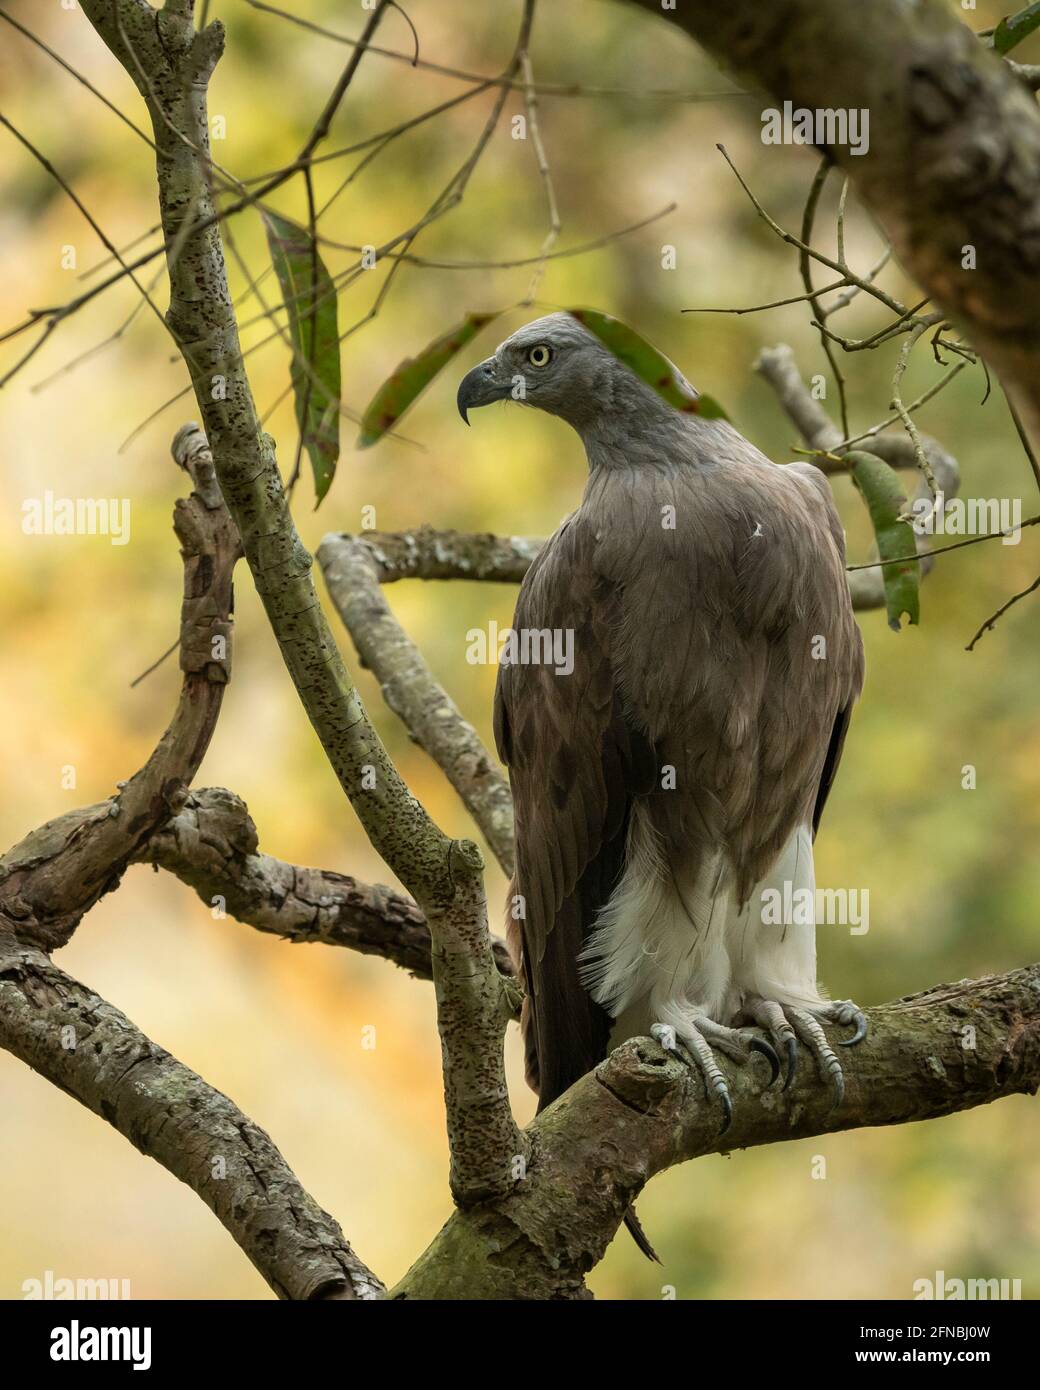 Lesser Fish Eagle or Haliaeetus humilis portrait perched in natural green background at dhikala zone of jim corbett national park or tiger reserve utt Stock Photo